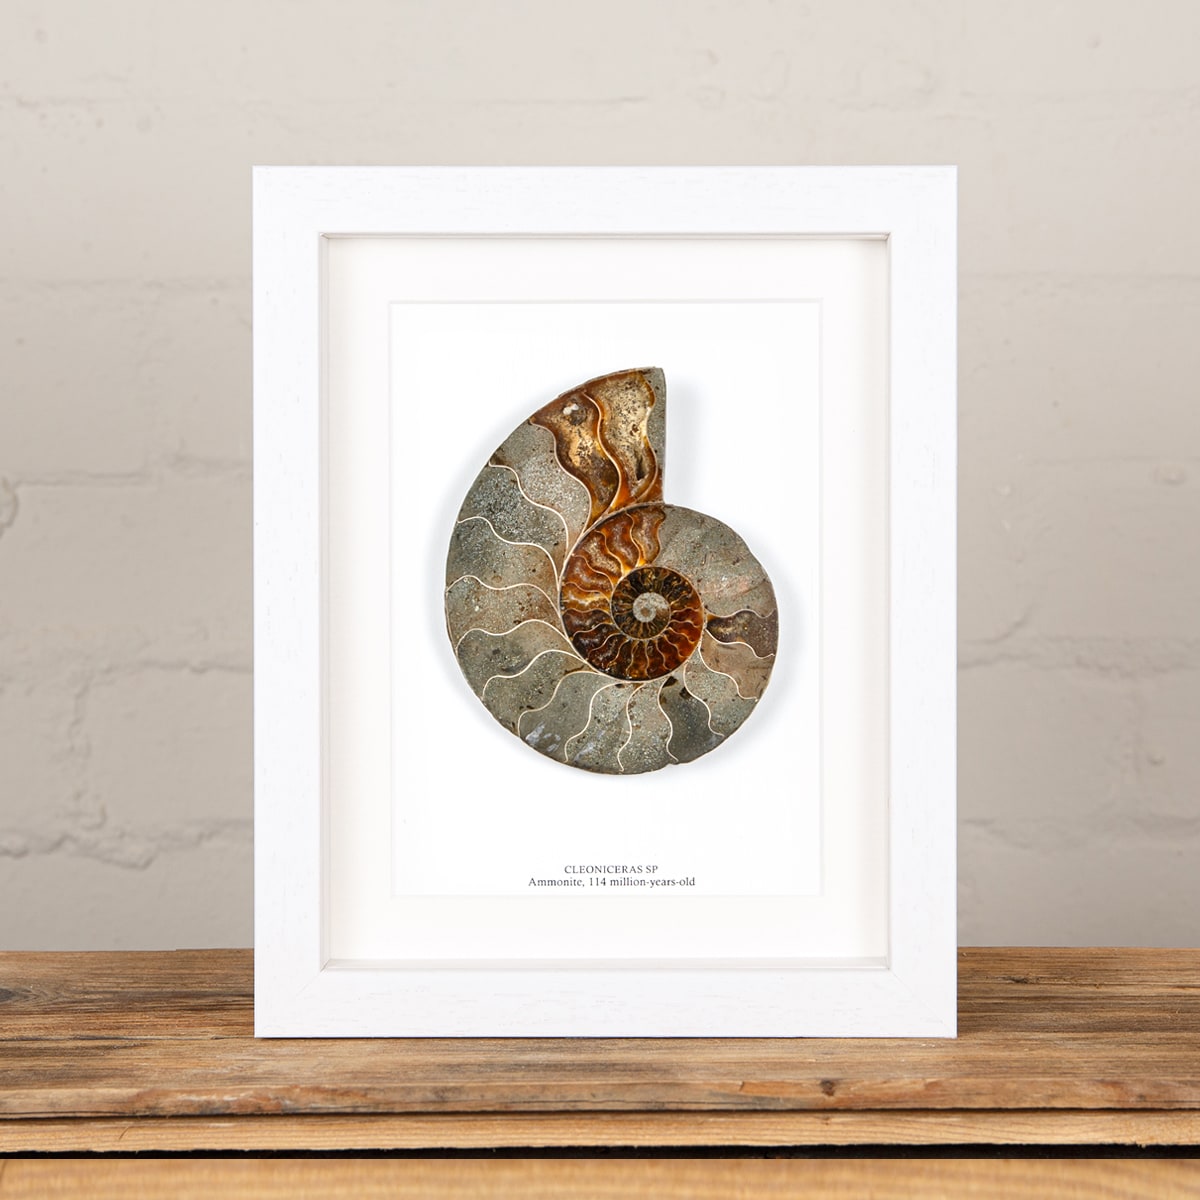 Large Ammonite Cut and Polished Fossil in Box Frame (Cleoniceras sp) 